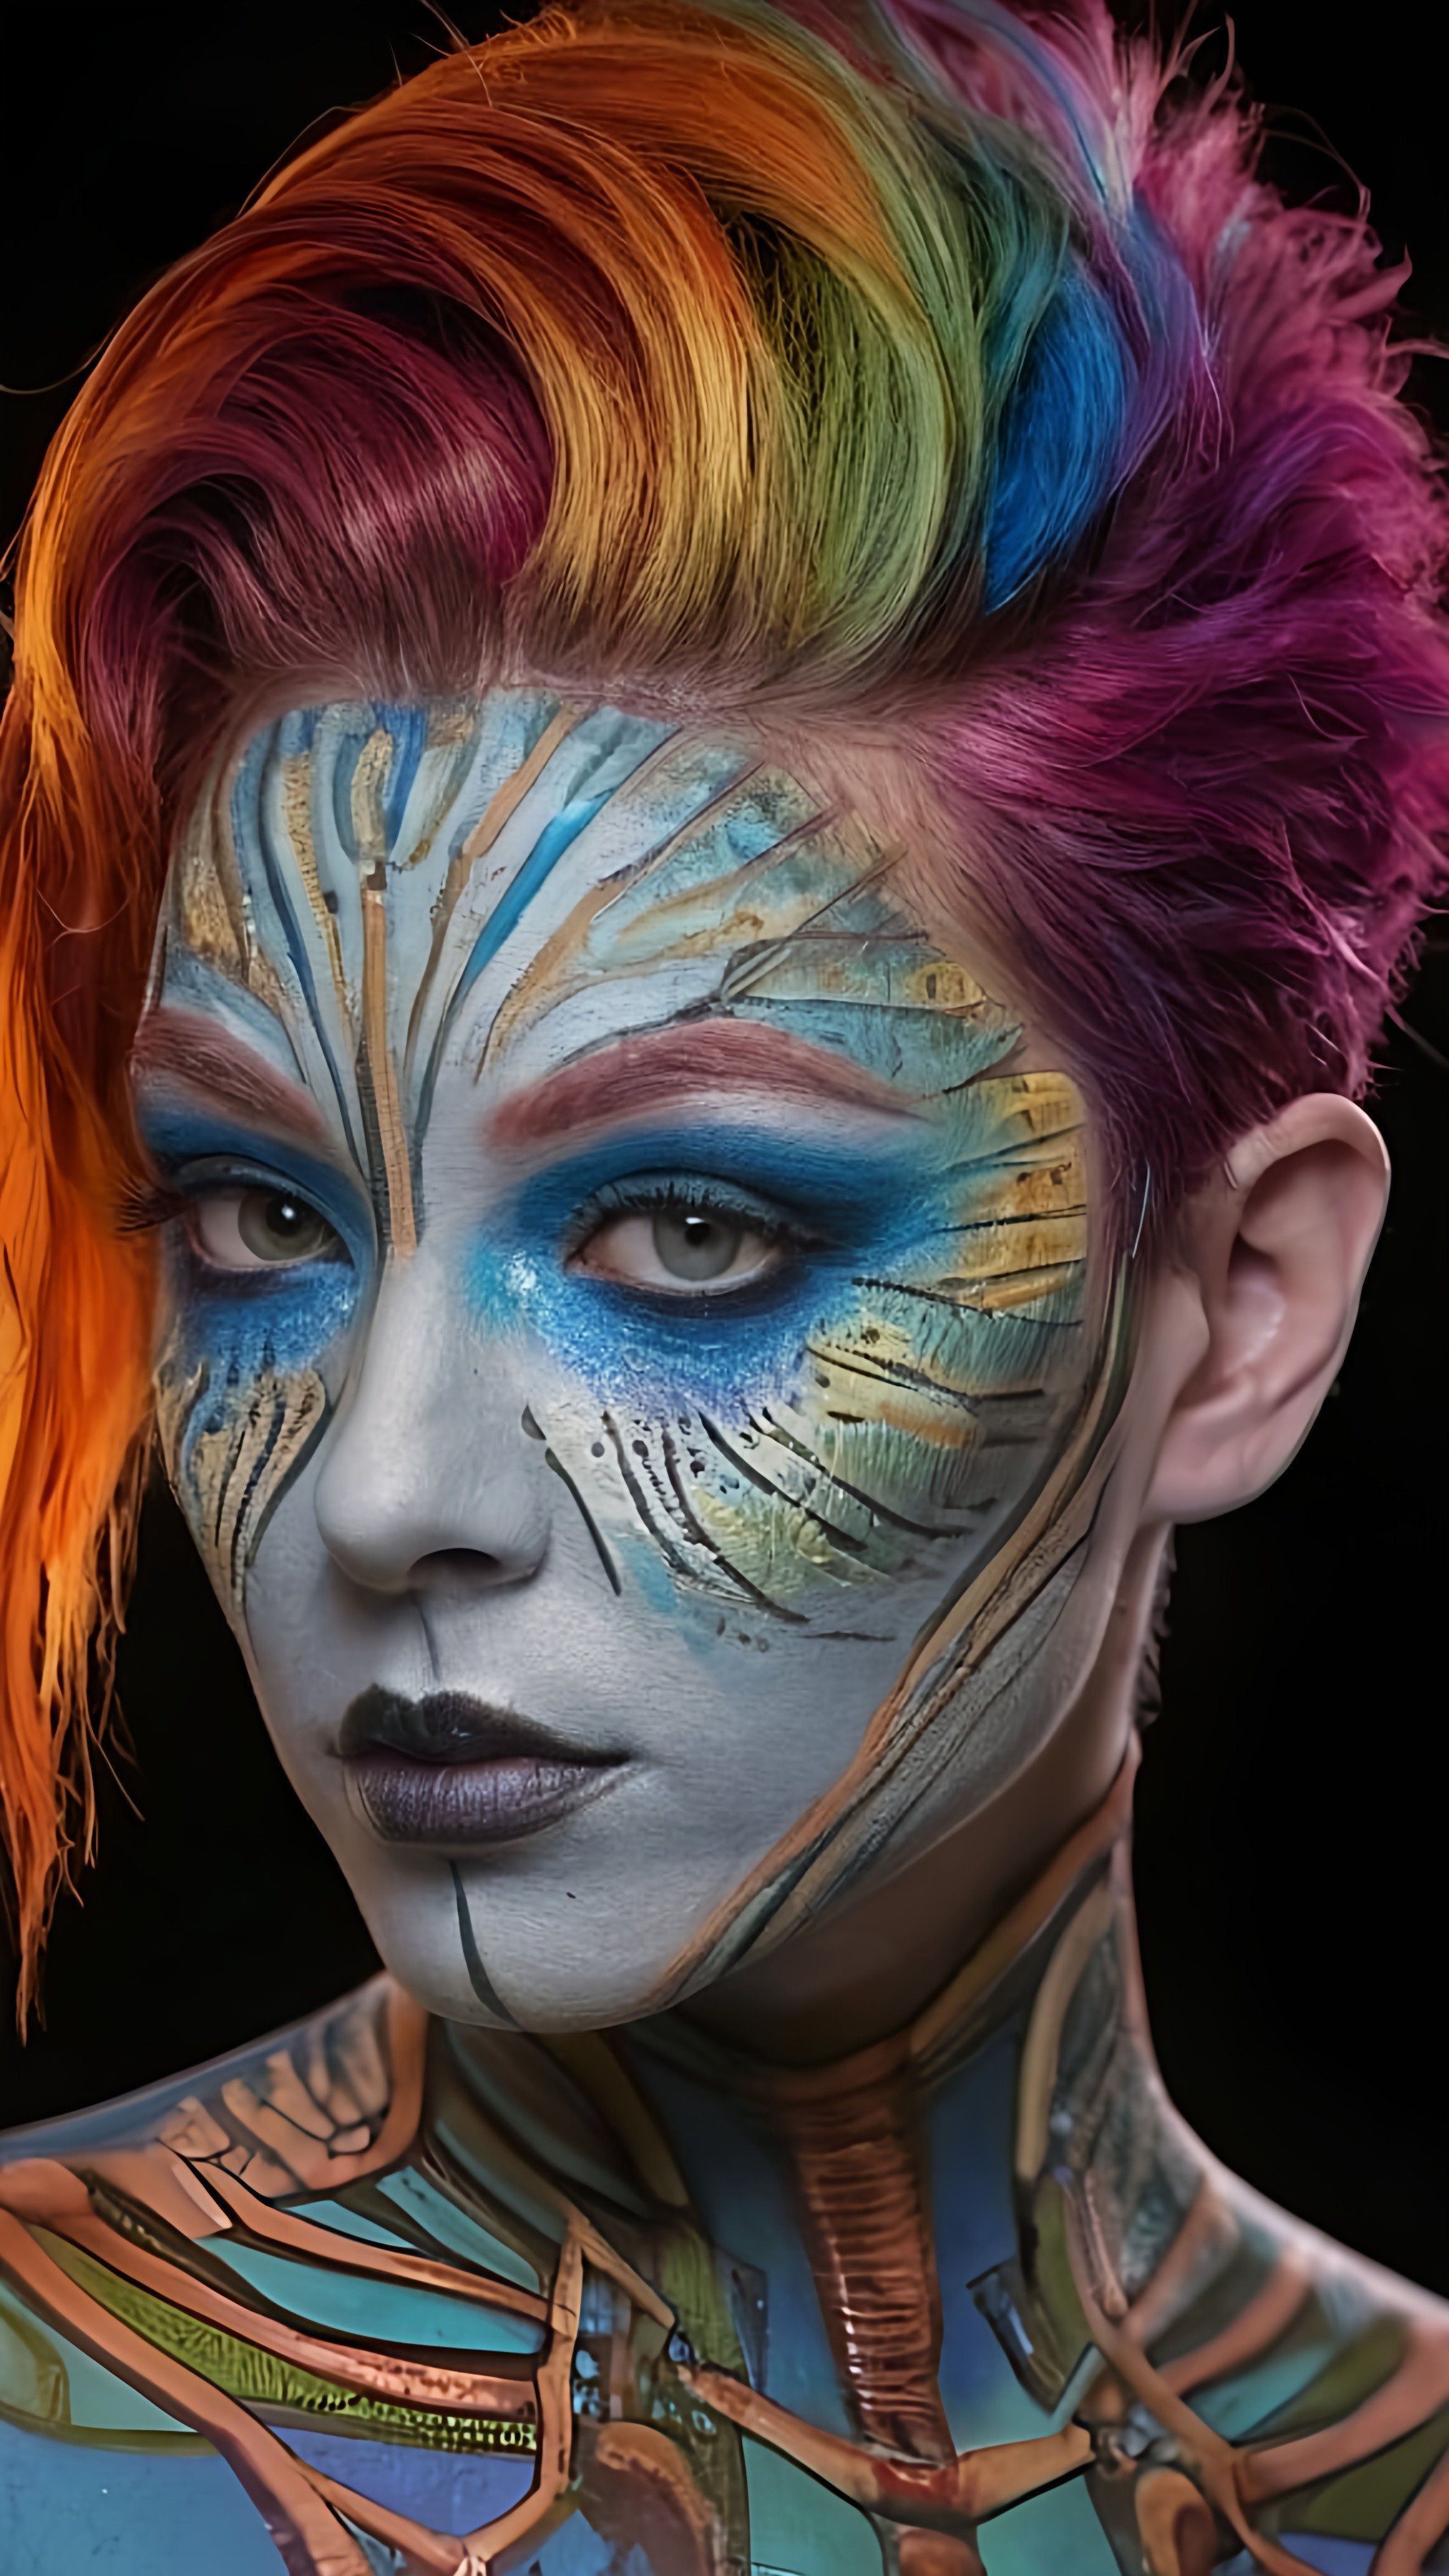 Prompt: a woman with colorful hair and makeup is posing for a photo with her face painted, affinity photo